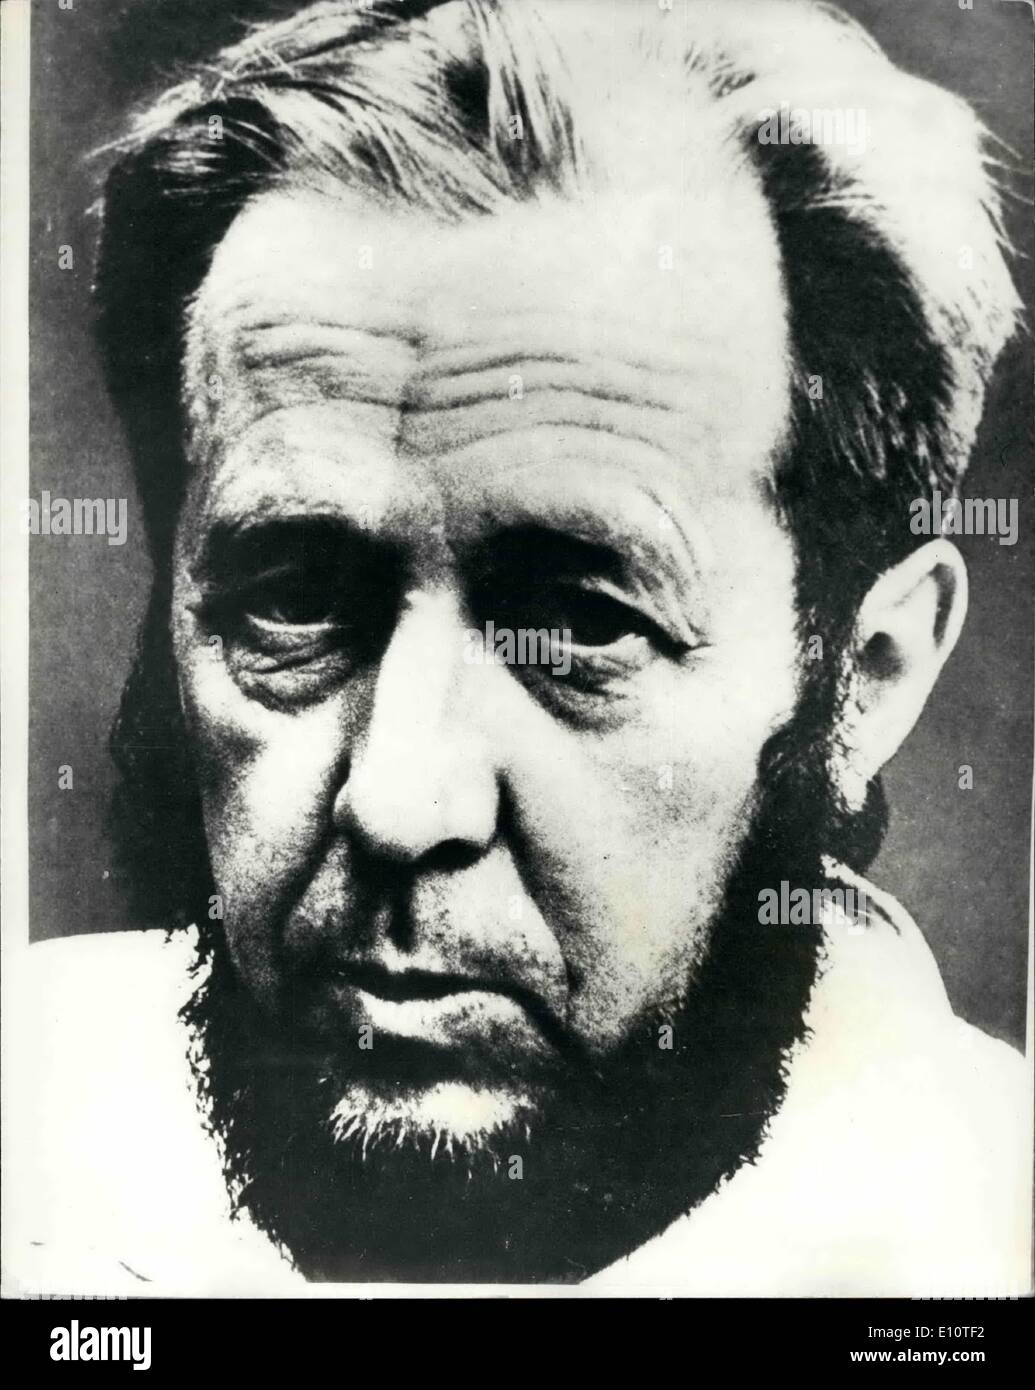 Feb. 02, 1974 - Russian Author Alexander Solzhenitsyn arrives in West Germany after deportation by the Russians: The rebel Russian author Alexander Solzhenitsyn, who was arrested in Moscow yesterday, created a sensation when he turned up in West Germany today following the news that he had been deported by the Russian authorities. It is said that he is travelling to the home of another Nobel Prize winning writer, Heinrich Boell. Photo shows Alexander Solzhenitsyn who has turned up in West Germany (picrture from file) Stock Photo